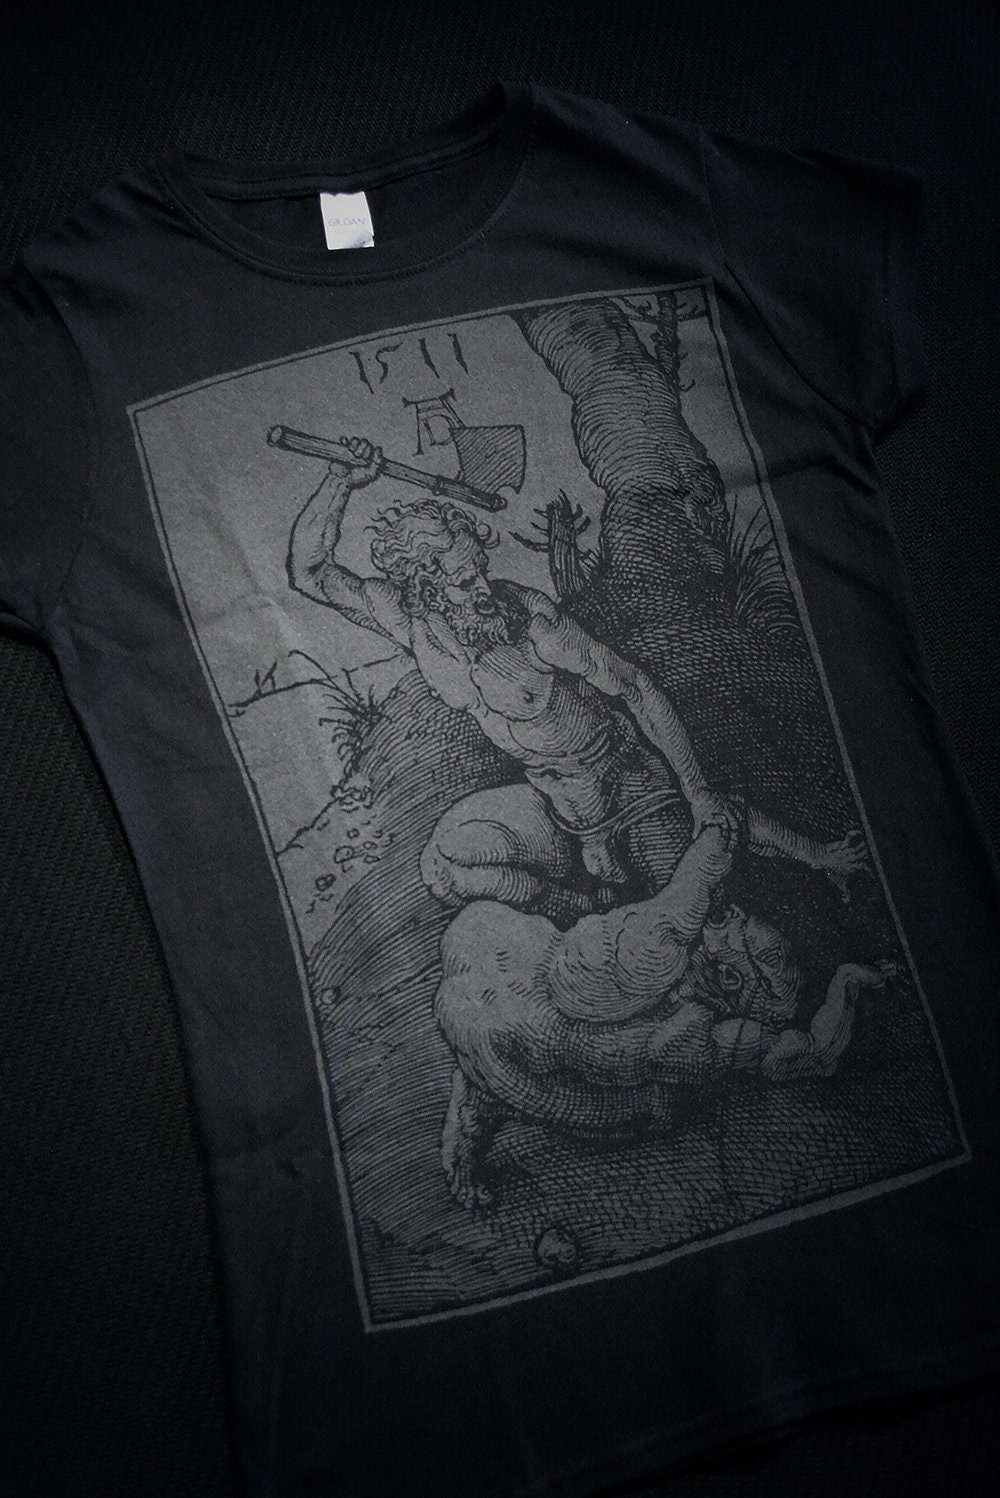 Cain and Abel, woodcut illustration by Albrecht Dürer - T-shirt female fitted